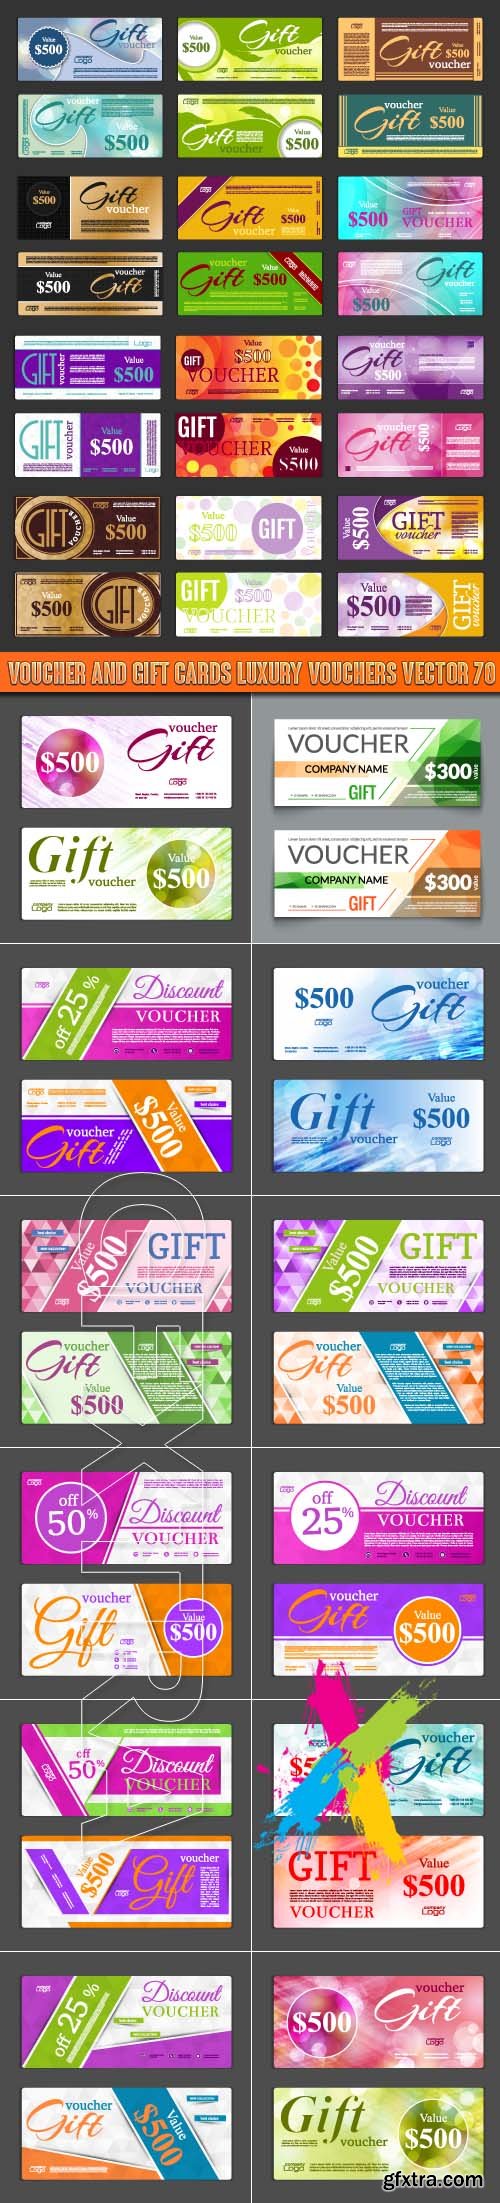 Voucher and gift cards luxury vouchers vector 70